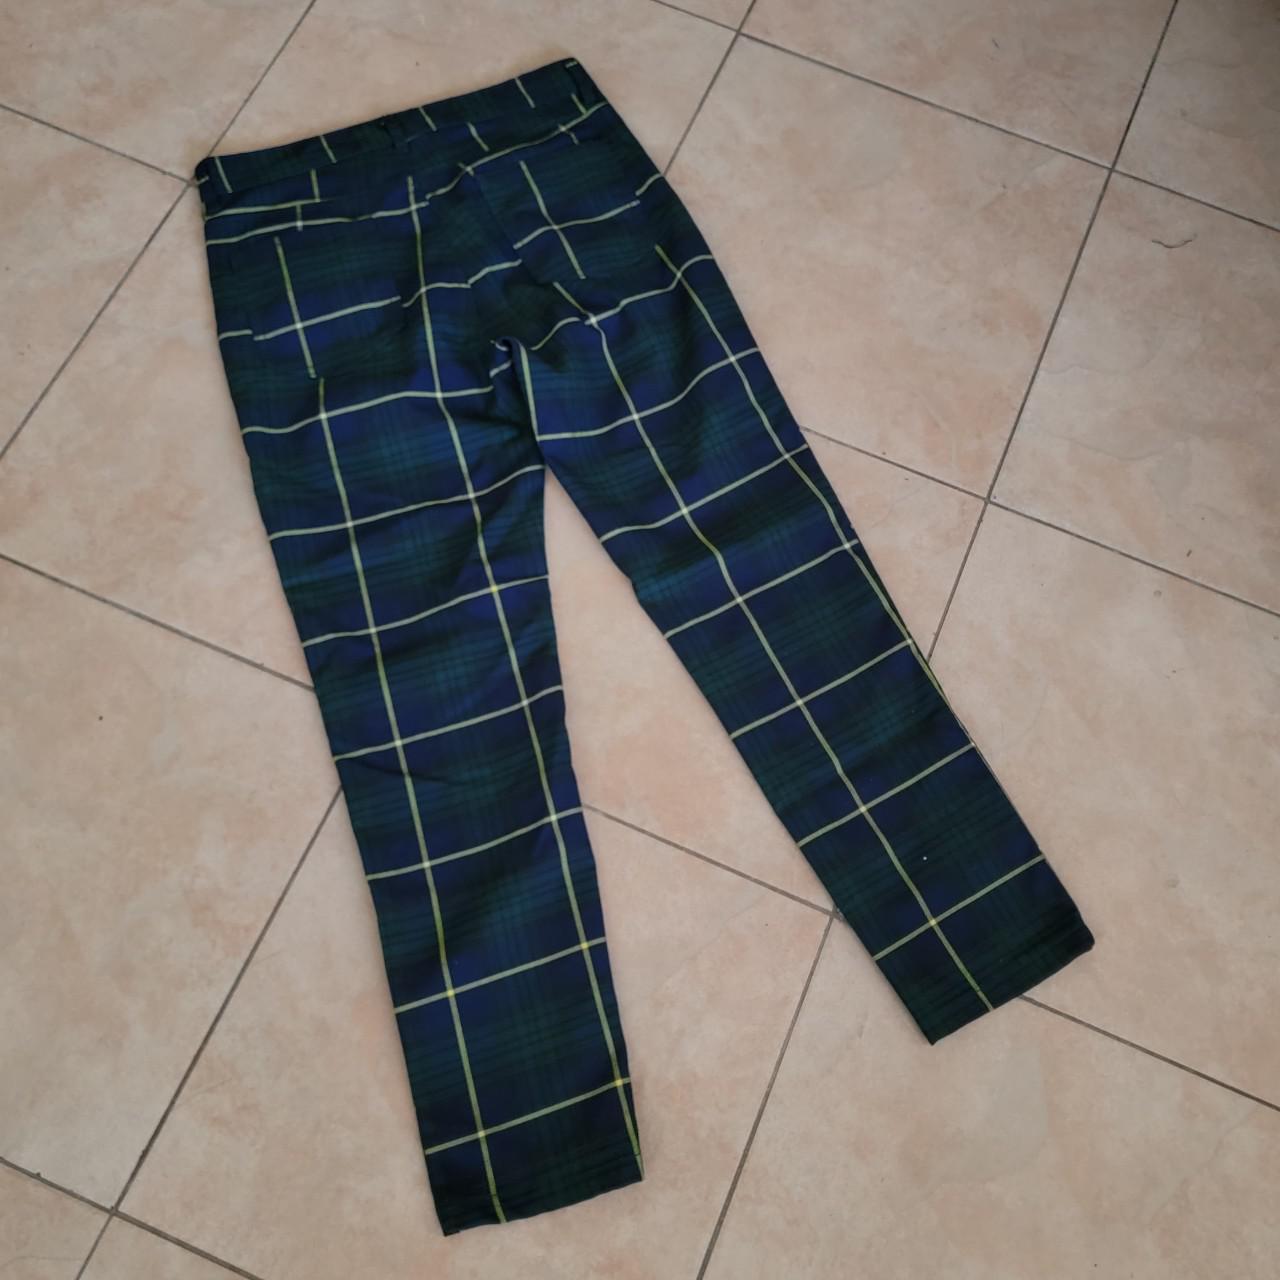 Product Image 3 - Blue & Green Plaid Pants

Brand